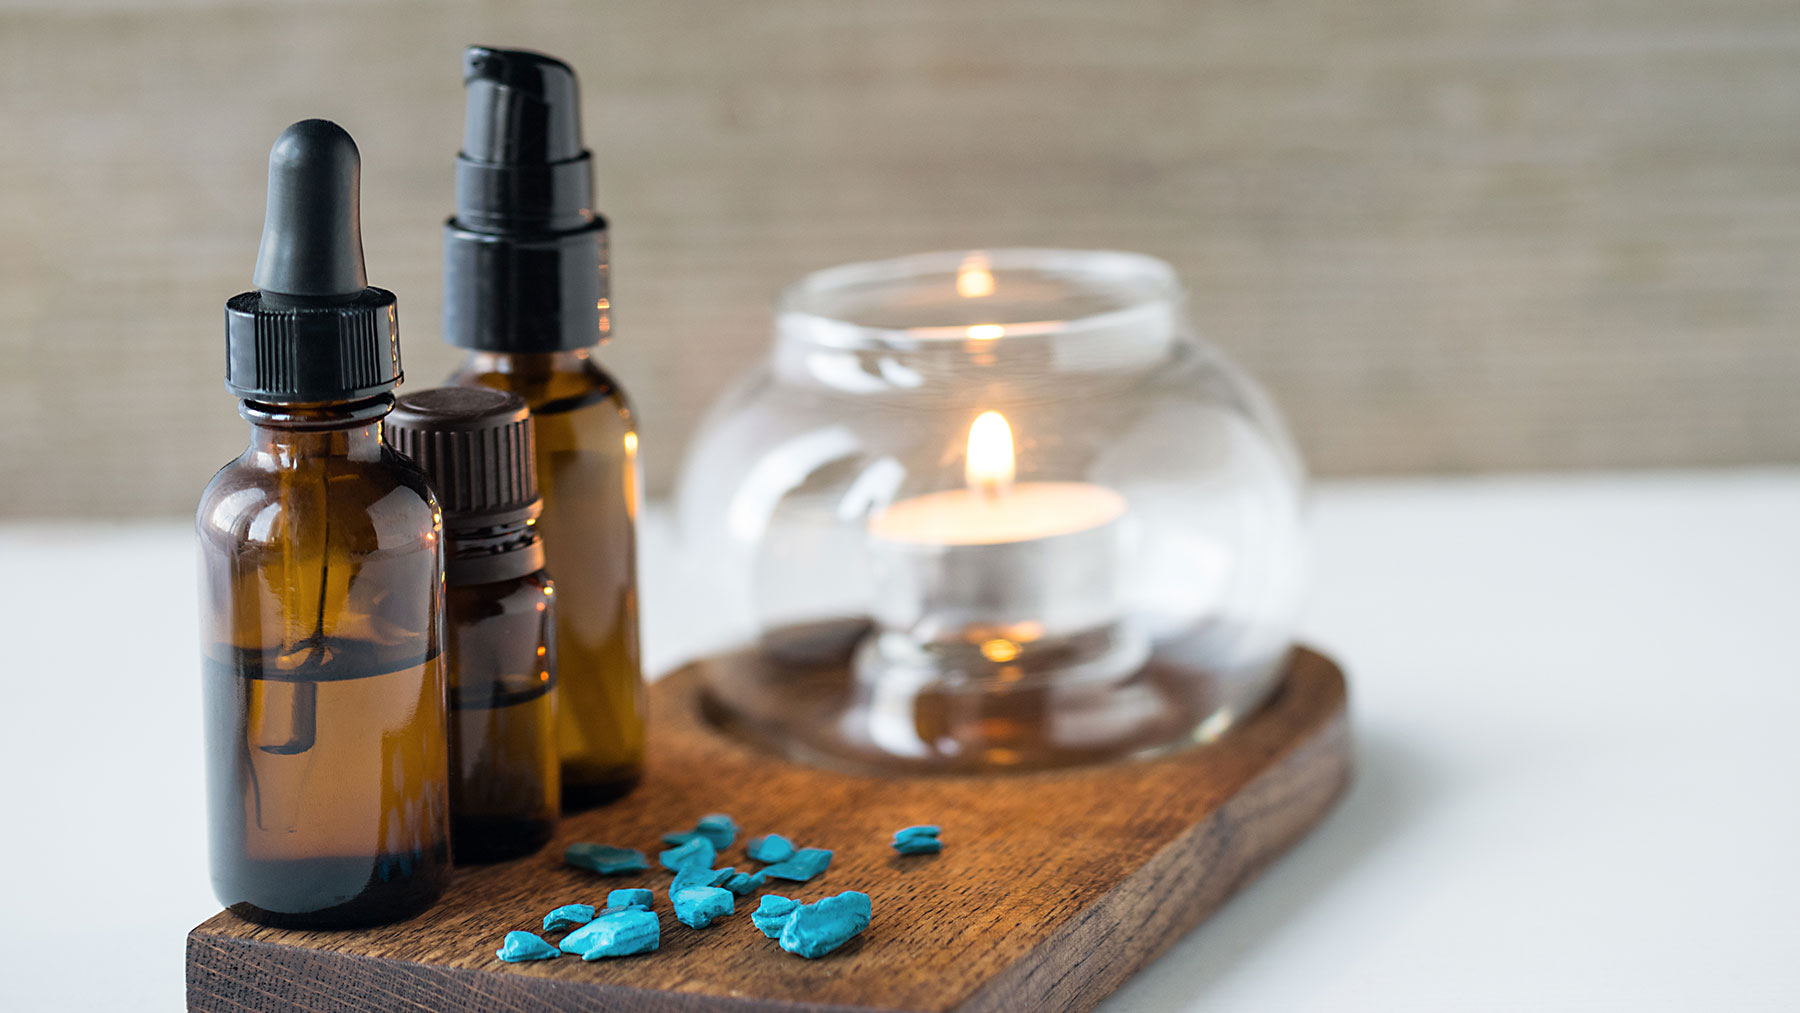 Essential Oils Are Complex Mixtures of Aromatic Compounds